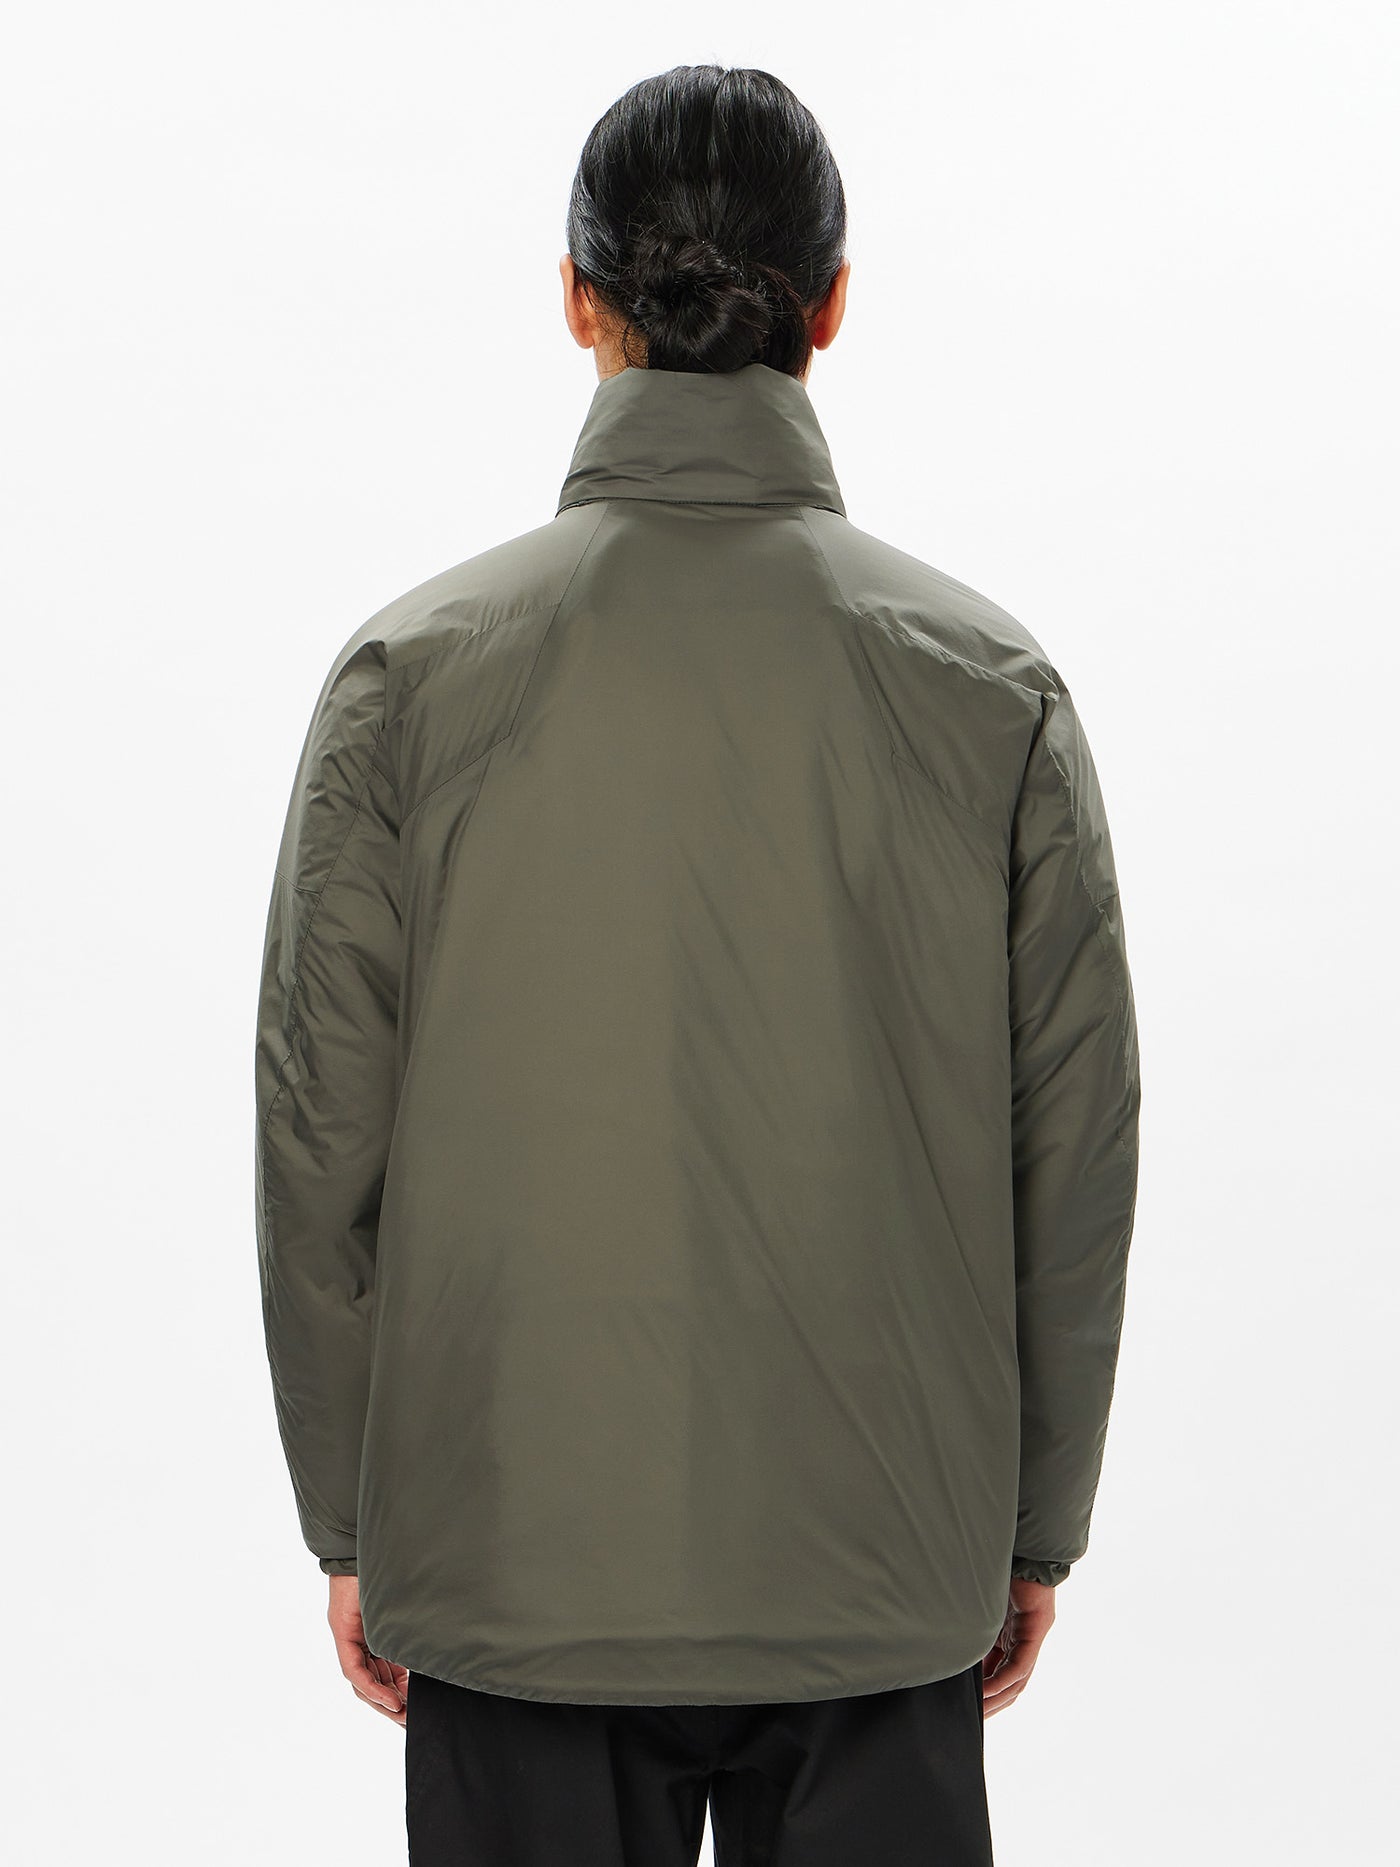 GORE-TEX WINDSTOPPER Puffy Tac Jacket